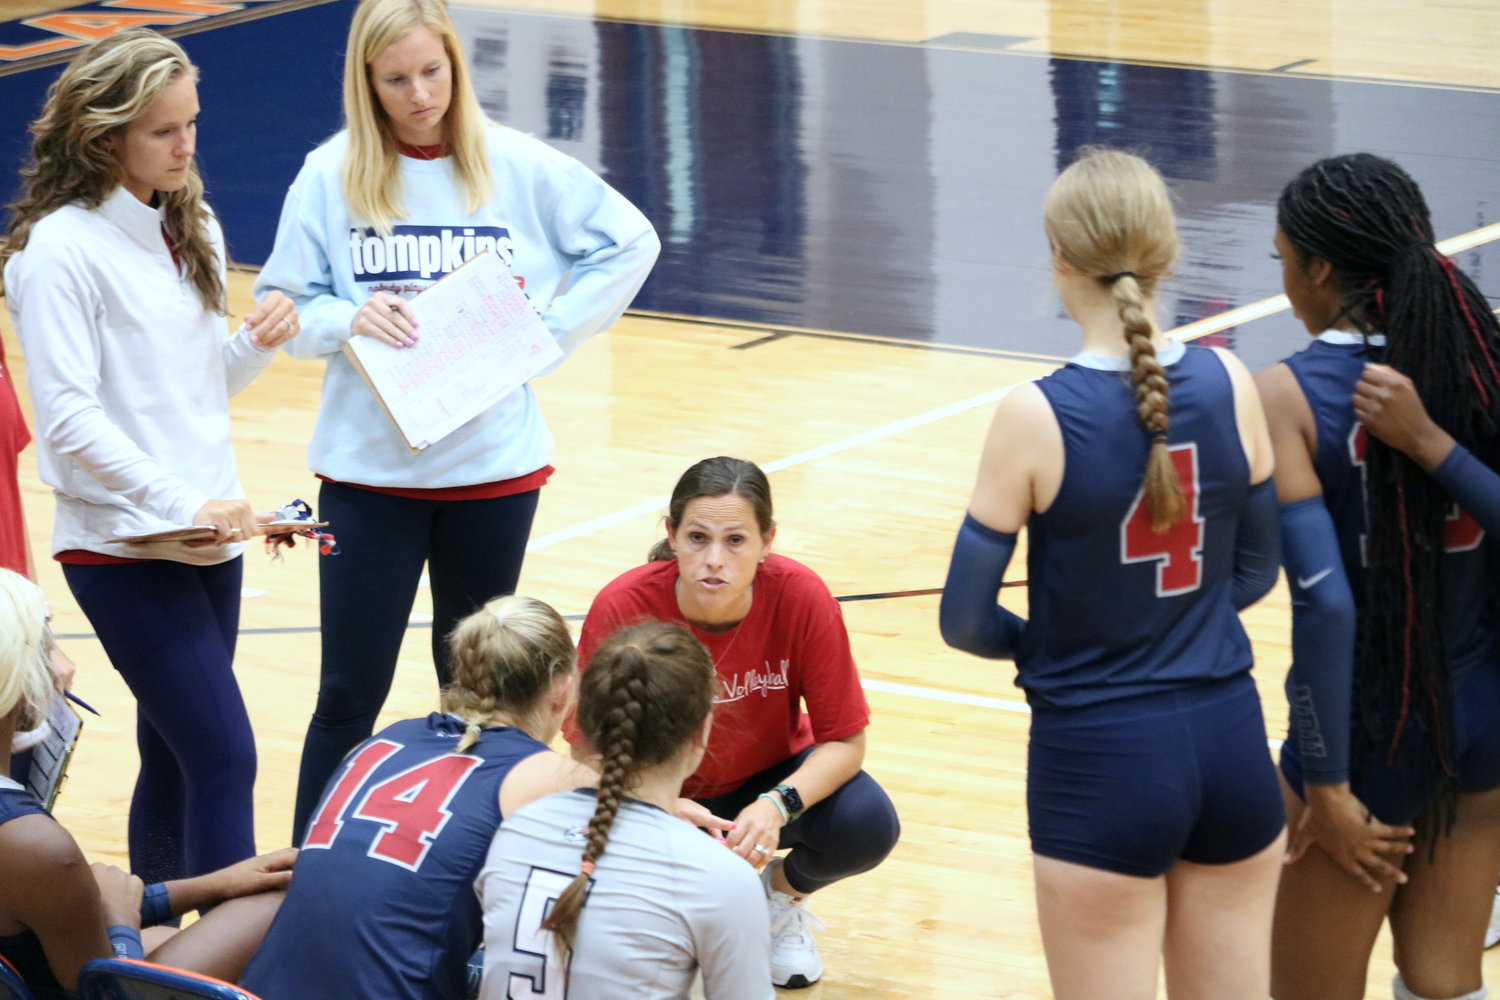 Tompkins head coach Allison Merrell and the Tompkins coaching staff talk to their team during a timeout against Canyon in the finals match of gold bracket Katy ISD/Cy-Fair Tournament at Bridgeland.